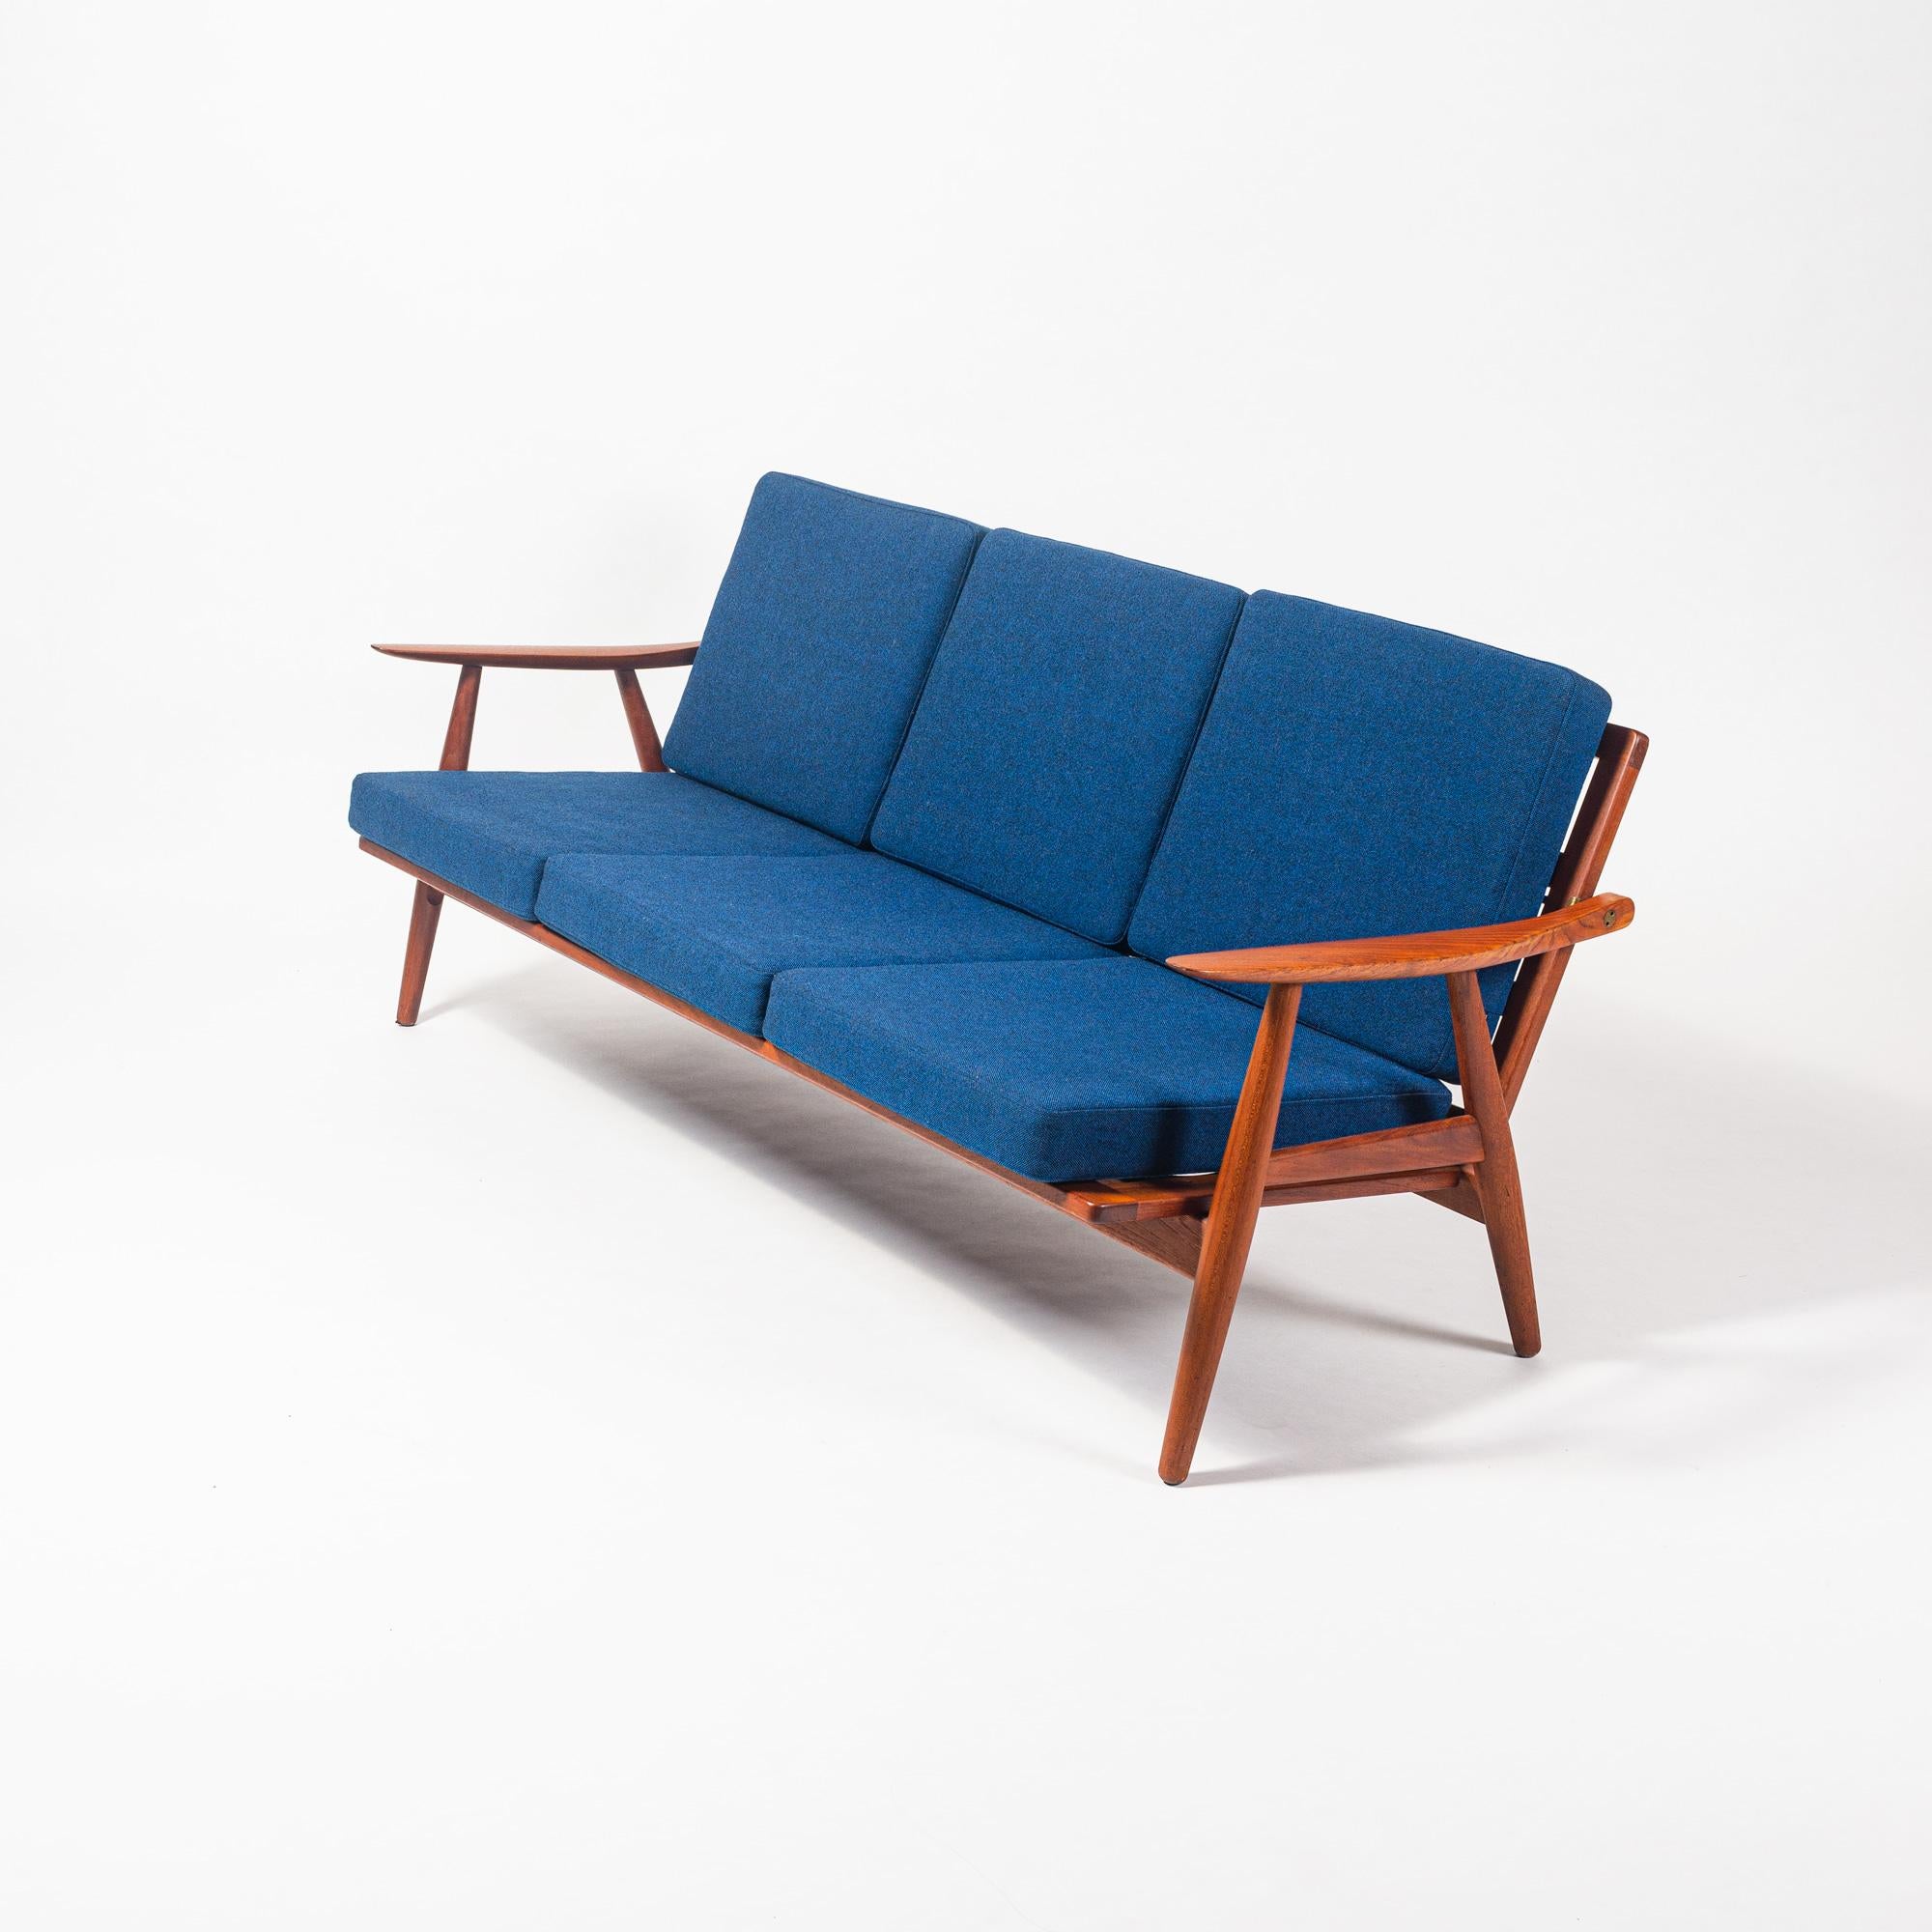 A Hans Wegner GE-270 three seater sofa in solid teak and new royal blue wool upholstery, circa 1950s. This sofa has a sculpted solid teak frame with exposed, bespoke brass fittings. Unlike the Wegner Cigar Series or other series, this model has